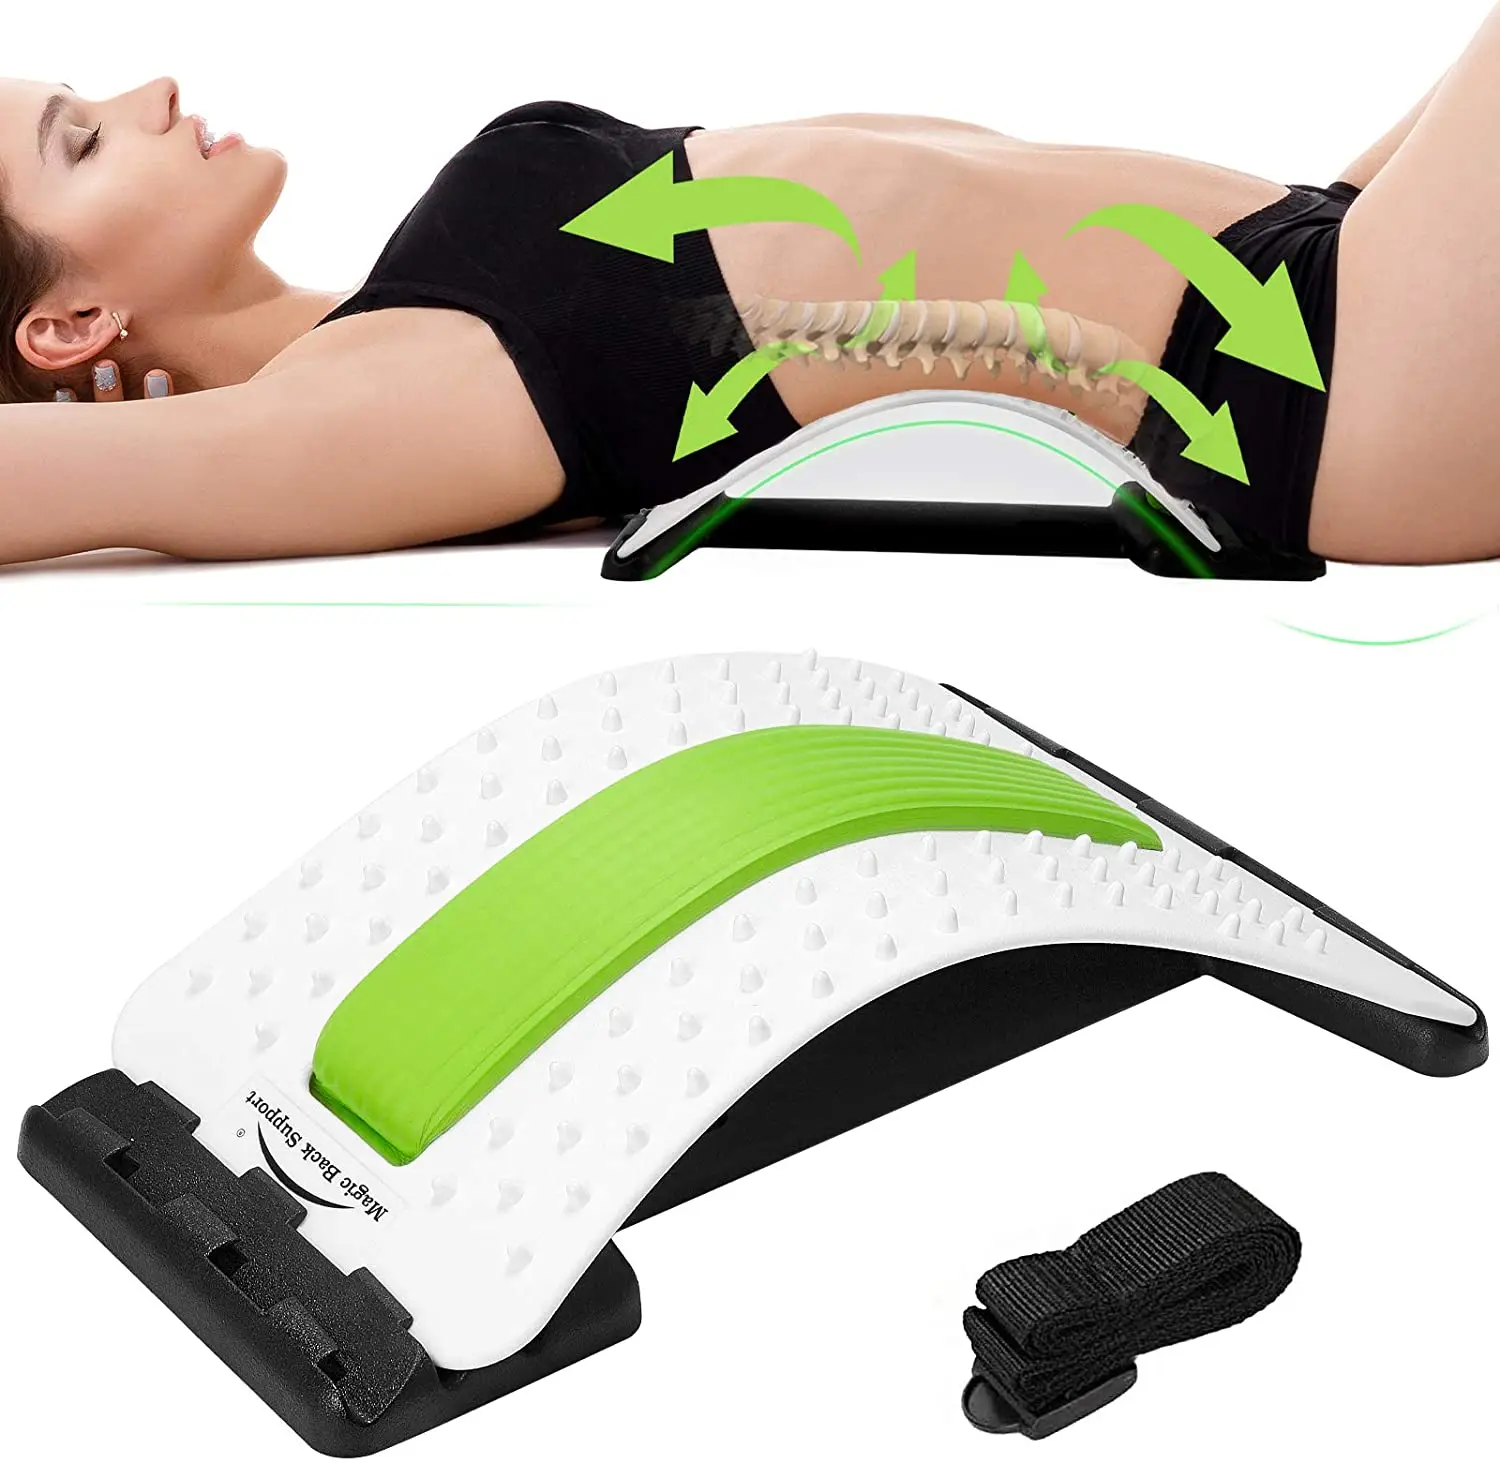 Back Massager and Posture Corrector for Men and Women Relaxation Stretcher Yoga& Fitness Muscle Relaxation Massager Office Sedentary Magic Stretchers KITEOAGE Back Stretcher 